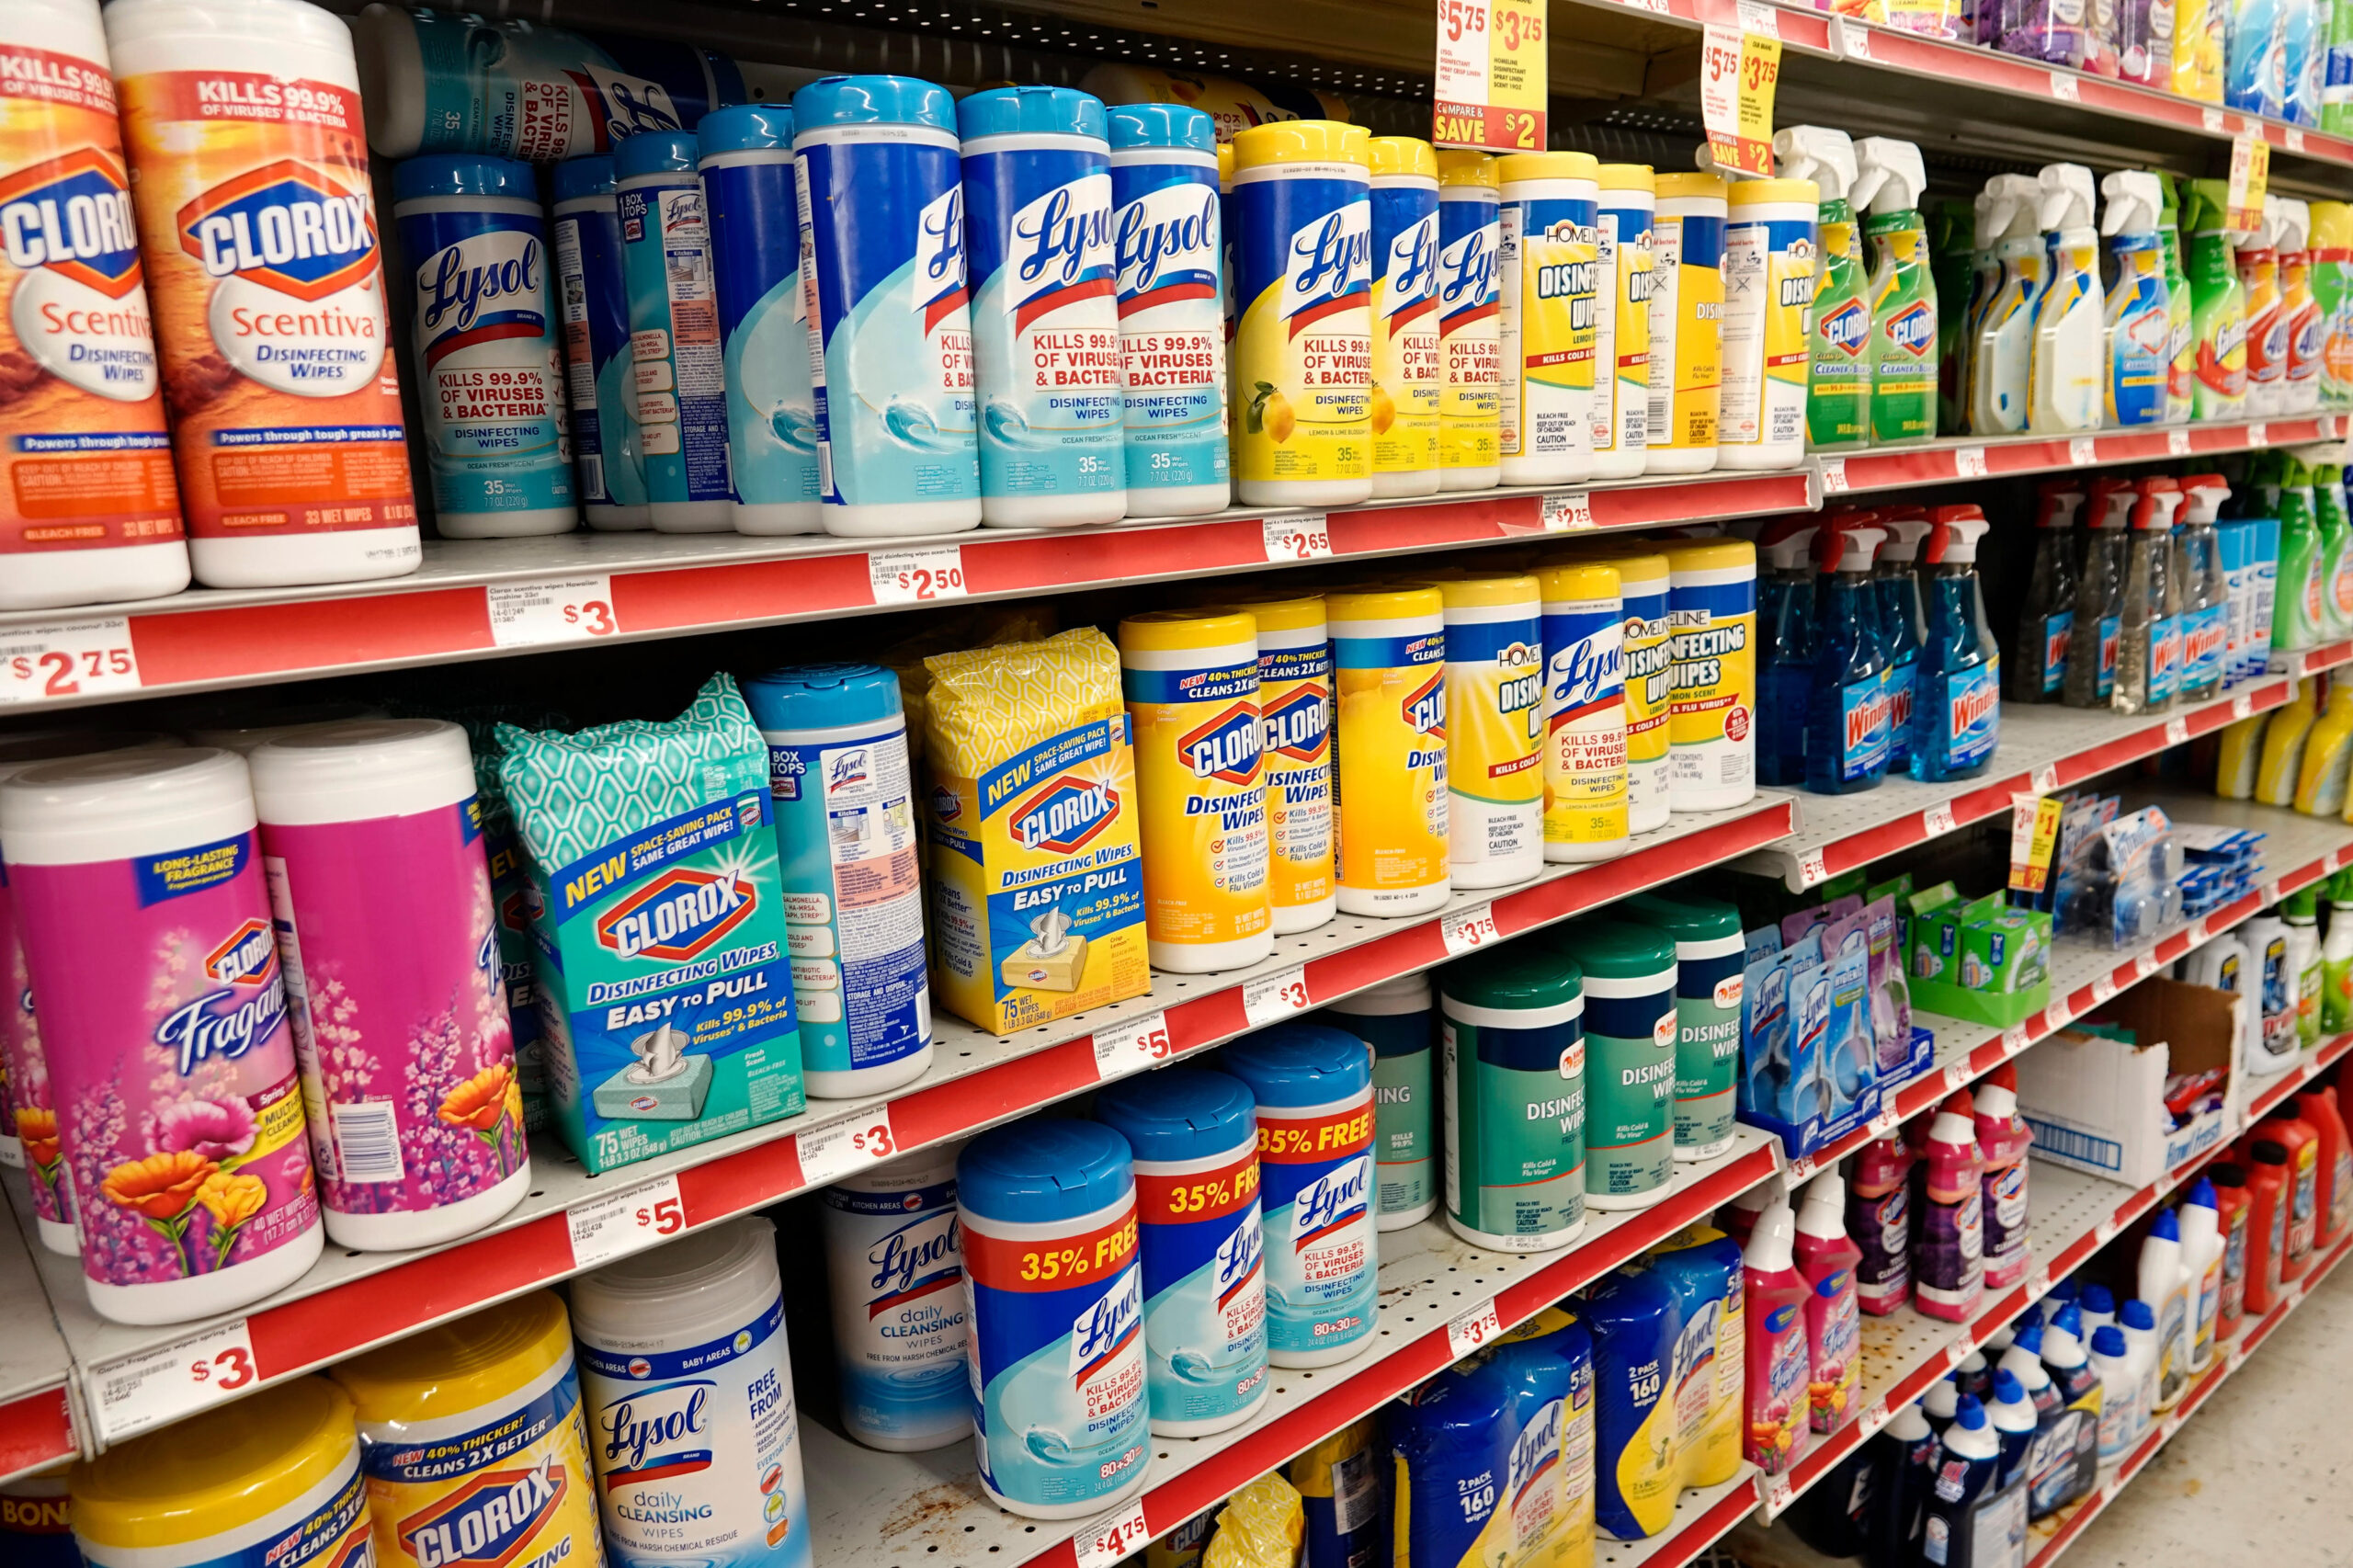 Clorox Sees Product Shortages Amid Cyberattack Cleanup – Source: www.darkreading.com